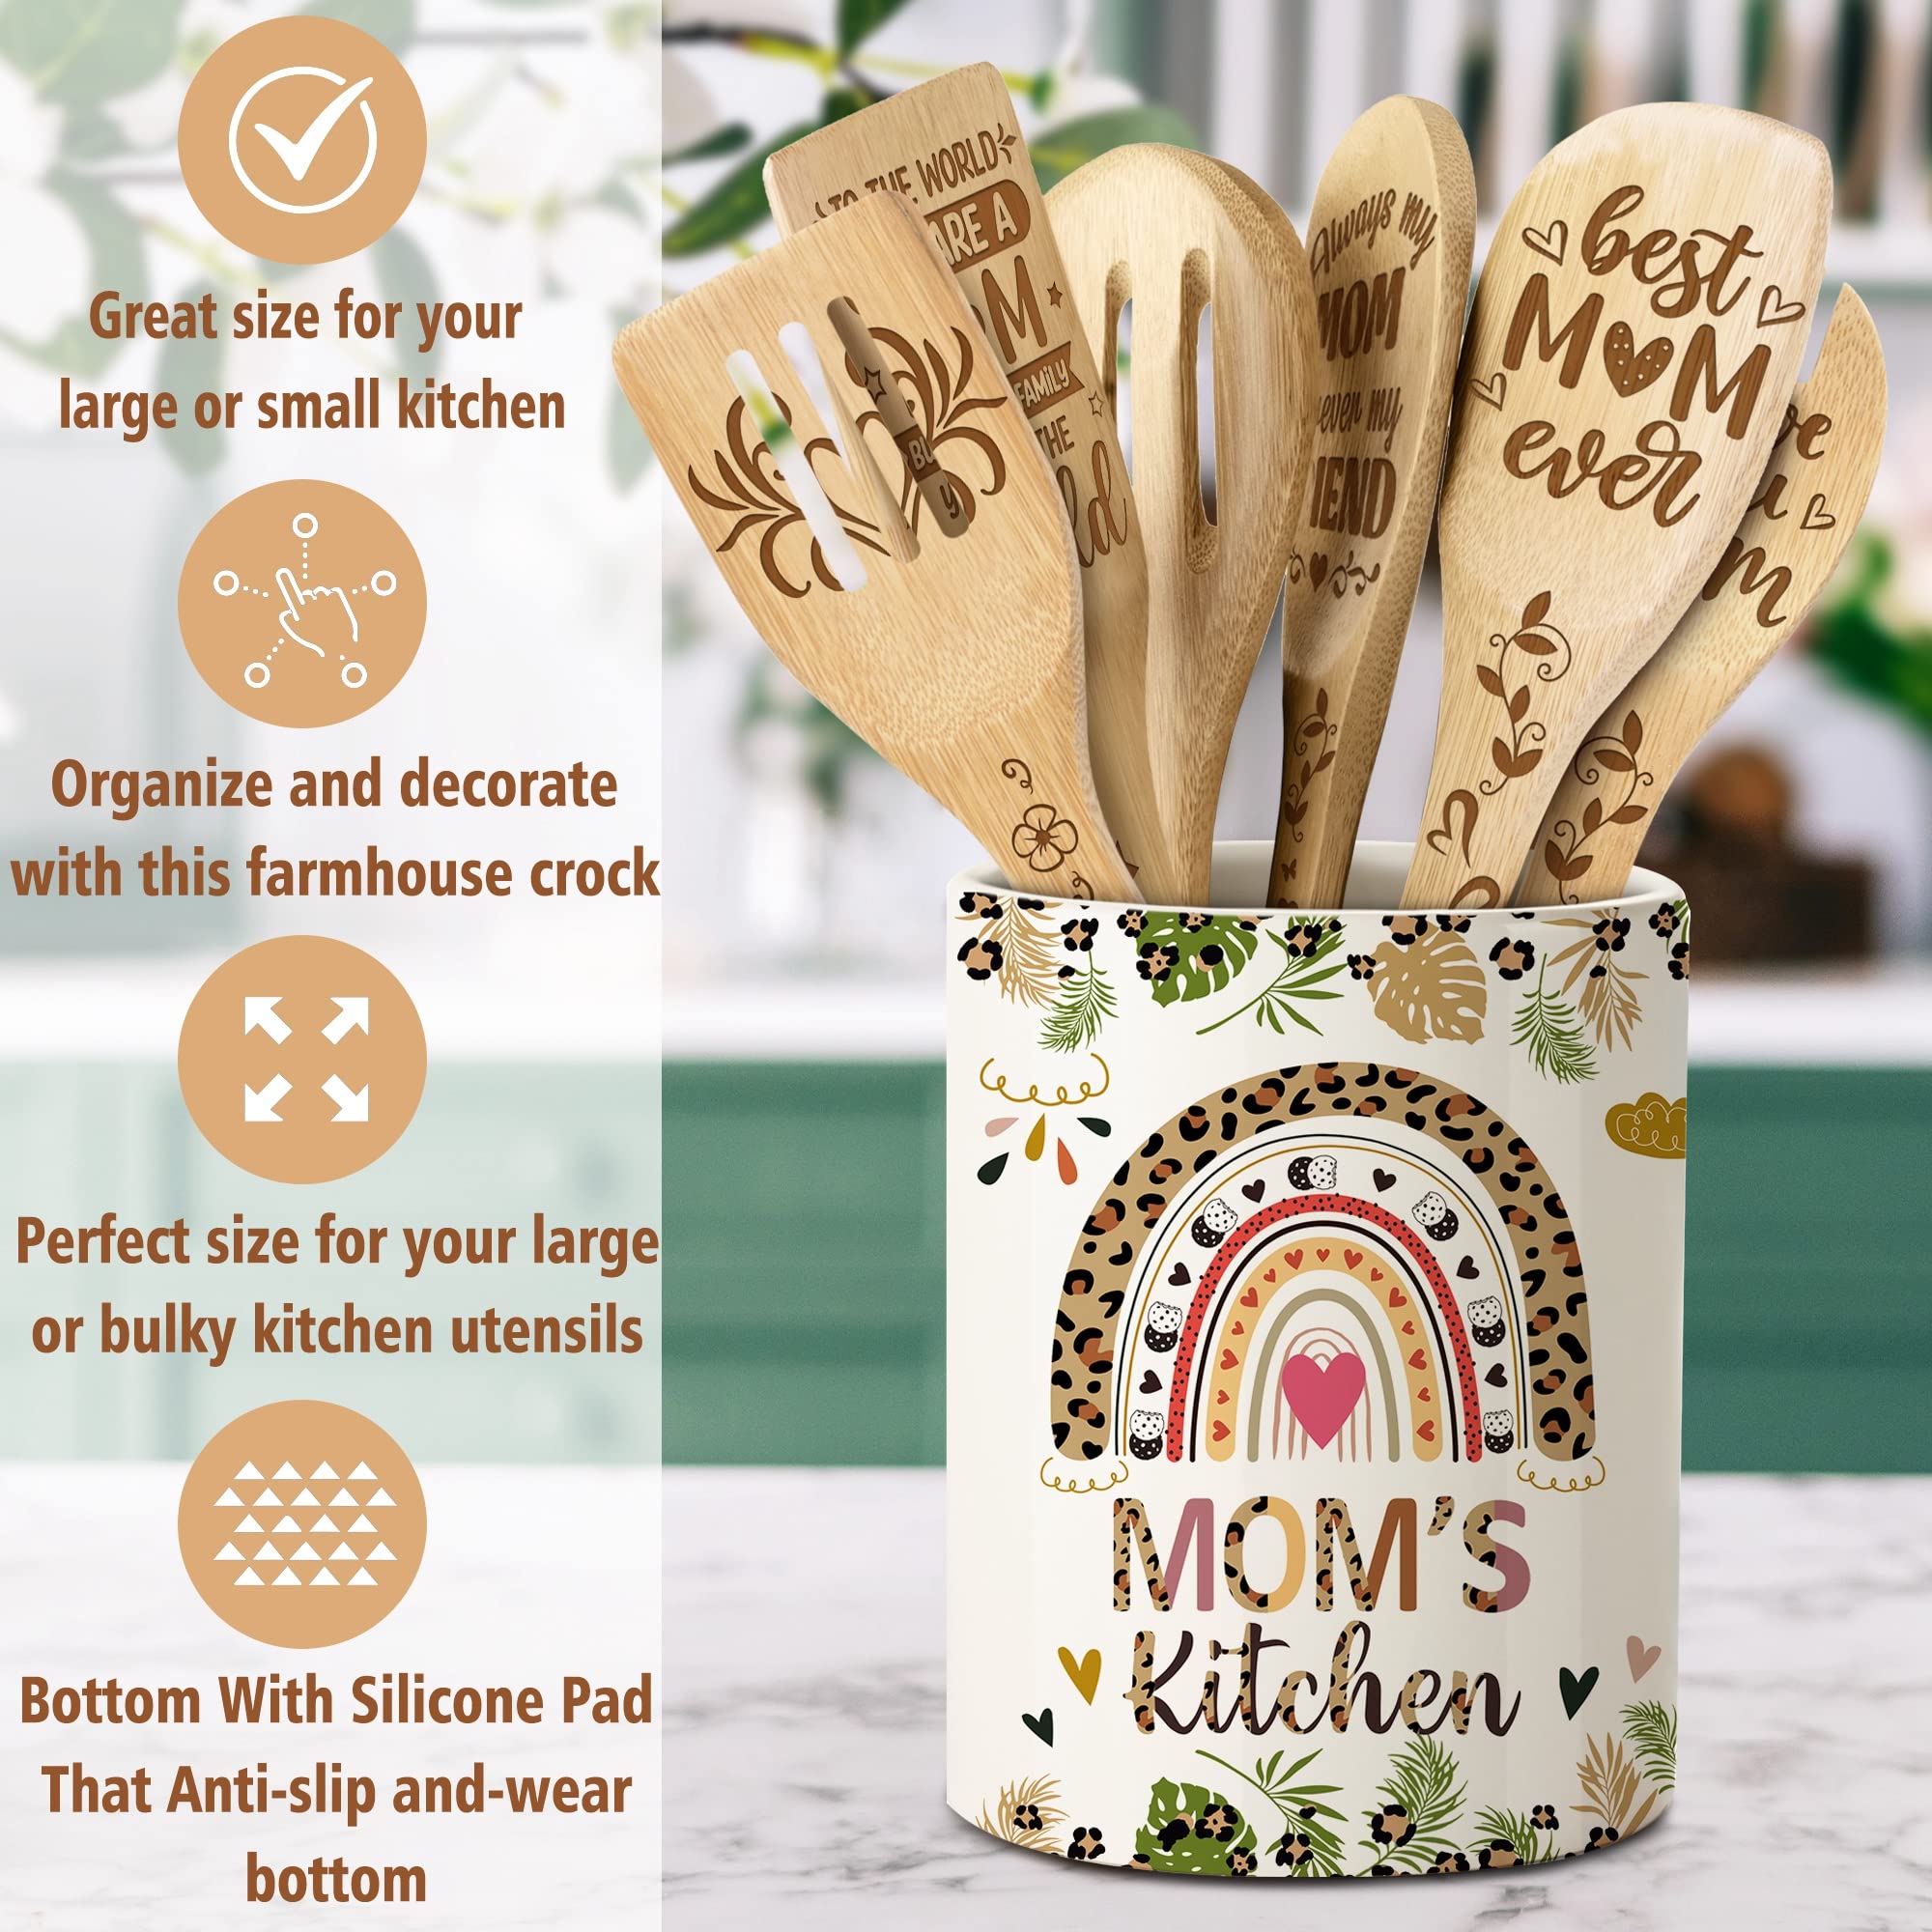 Rabbitable Gifts for Mom, Ceramic Utensil Holder for Cooking with Wooden Spoons Mothers Day Gifts for Mom, Mom Mothers Day Gift Cooking Tools Kitchen Utensils Set with Wooden Spoons for 6